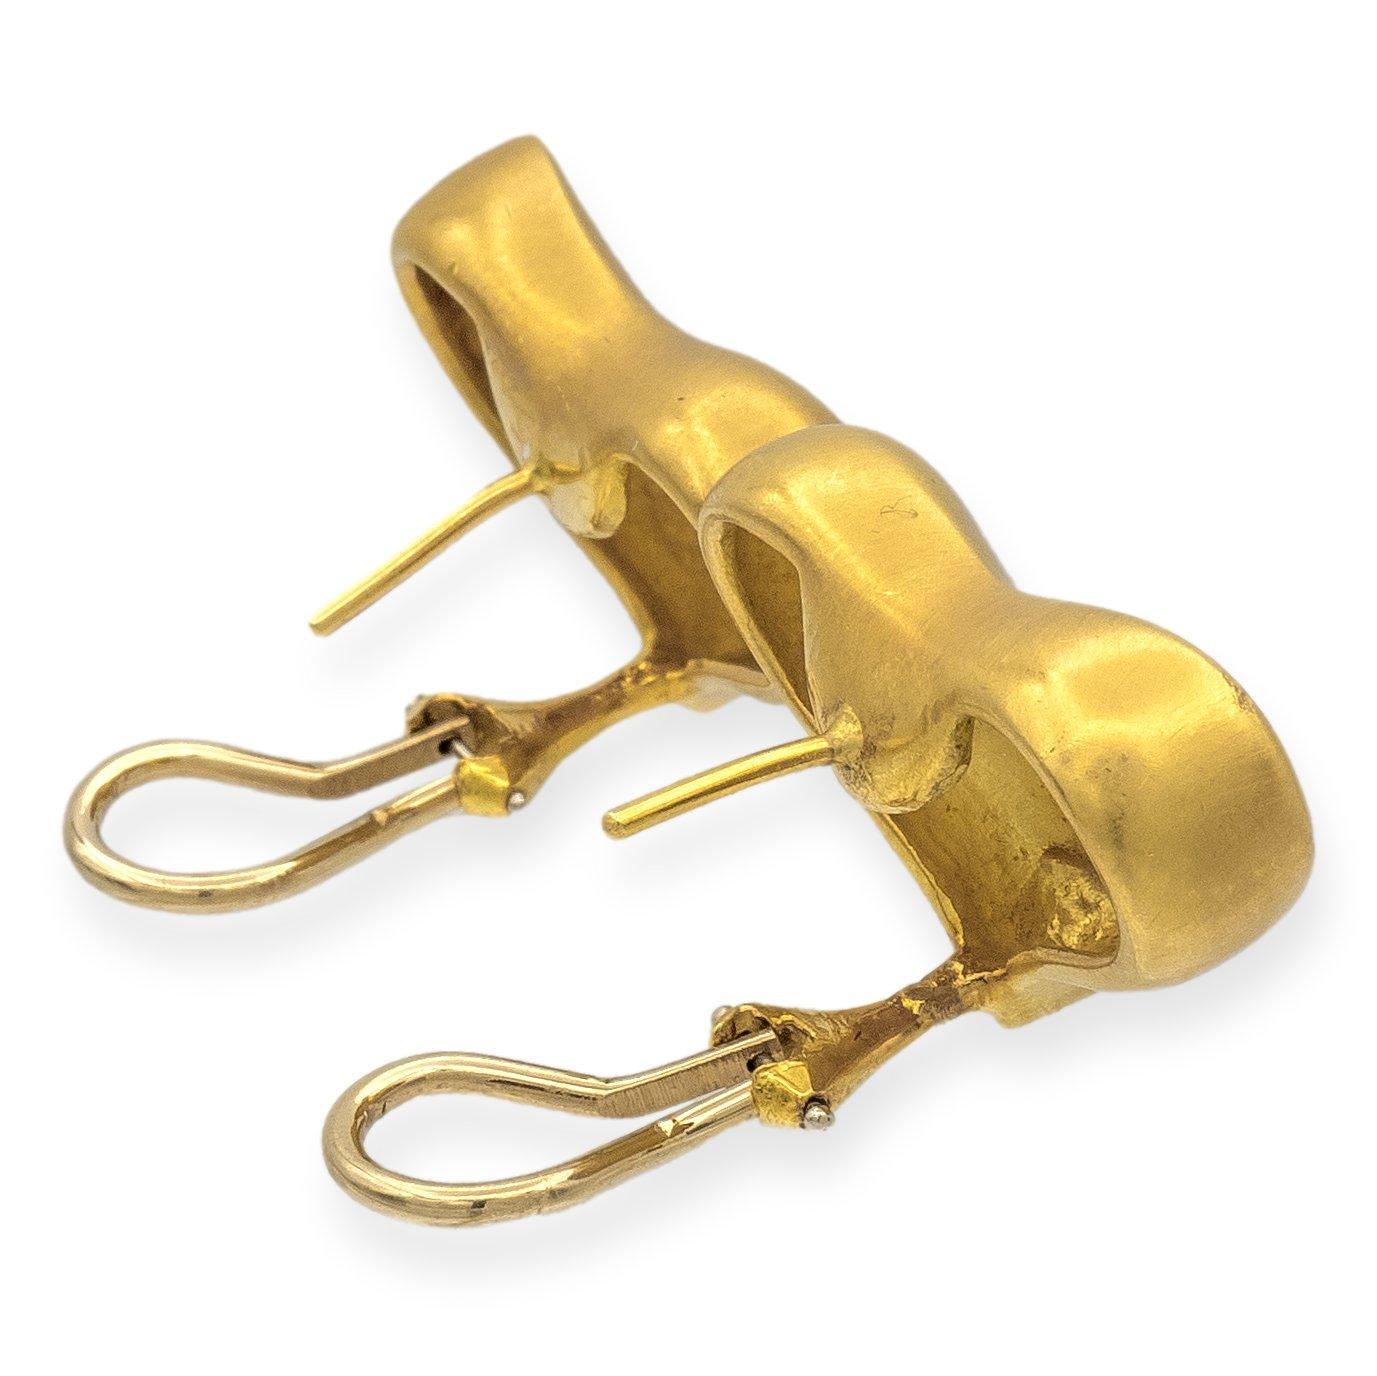 Vintage Angela Cummings earrings made in 1985, meticulously crafted in 18-karat yellow gold with heart motifs, adorned in a satin gold finish, exude a subtle charm. The generously sized omega clip backs and posts ensure a secure and comfortable fit.